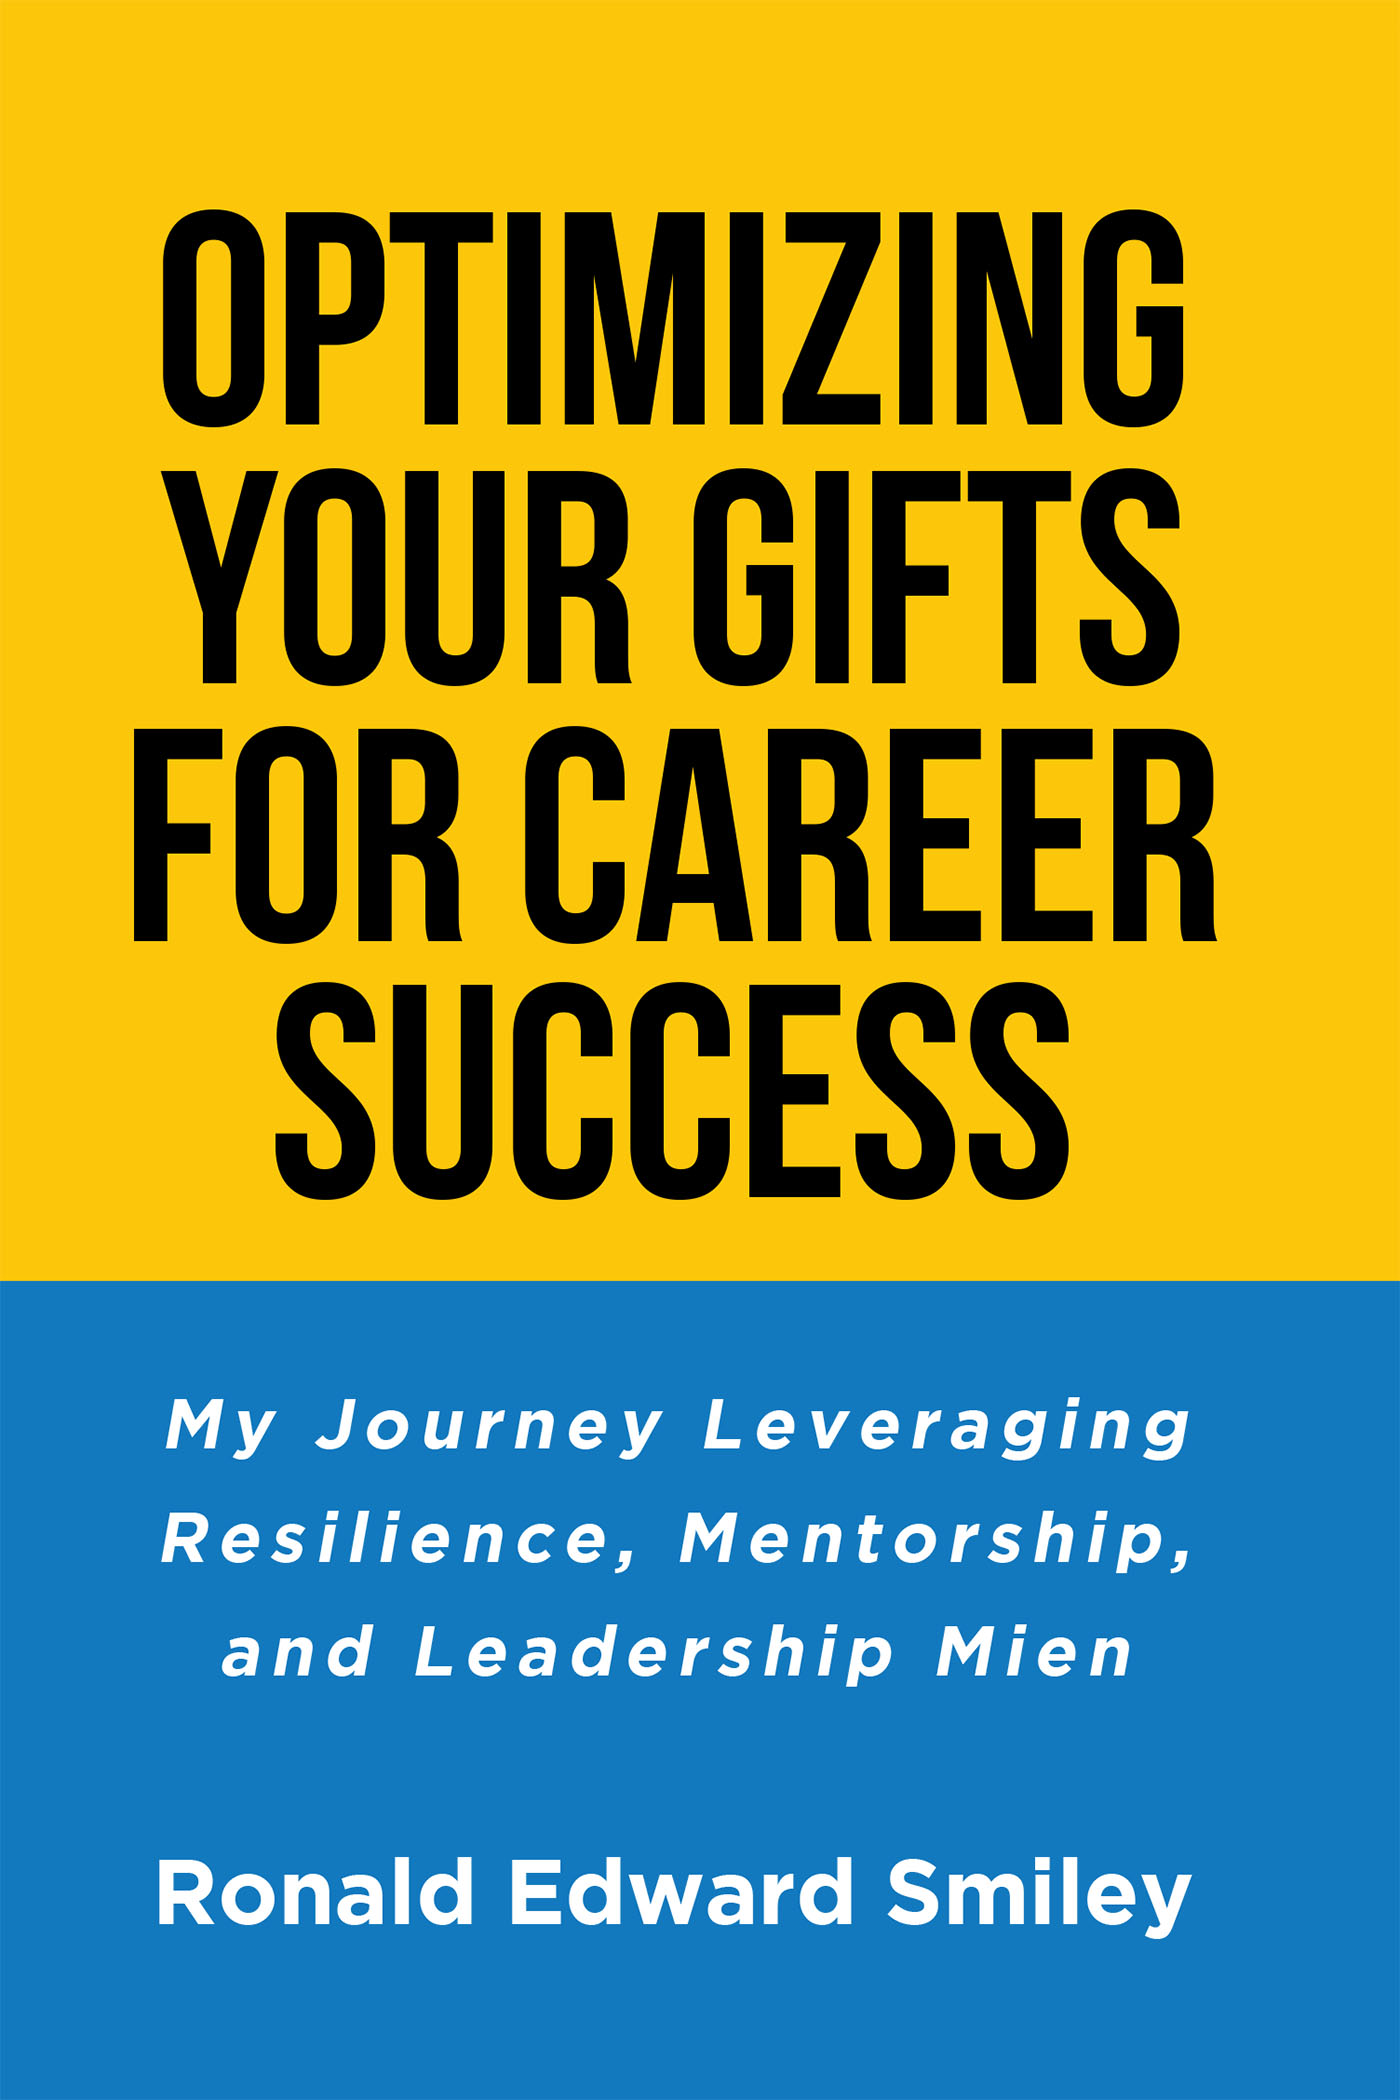 Author Ronald Edward Smiley’s New Book, “Optimizing Your Gifts for Career Success: My Journey Leveraging Resilience, Mentorship, and Leadership Mien,” is Released